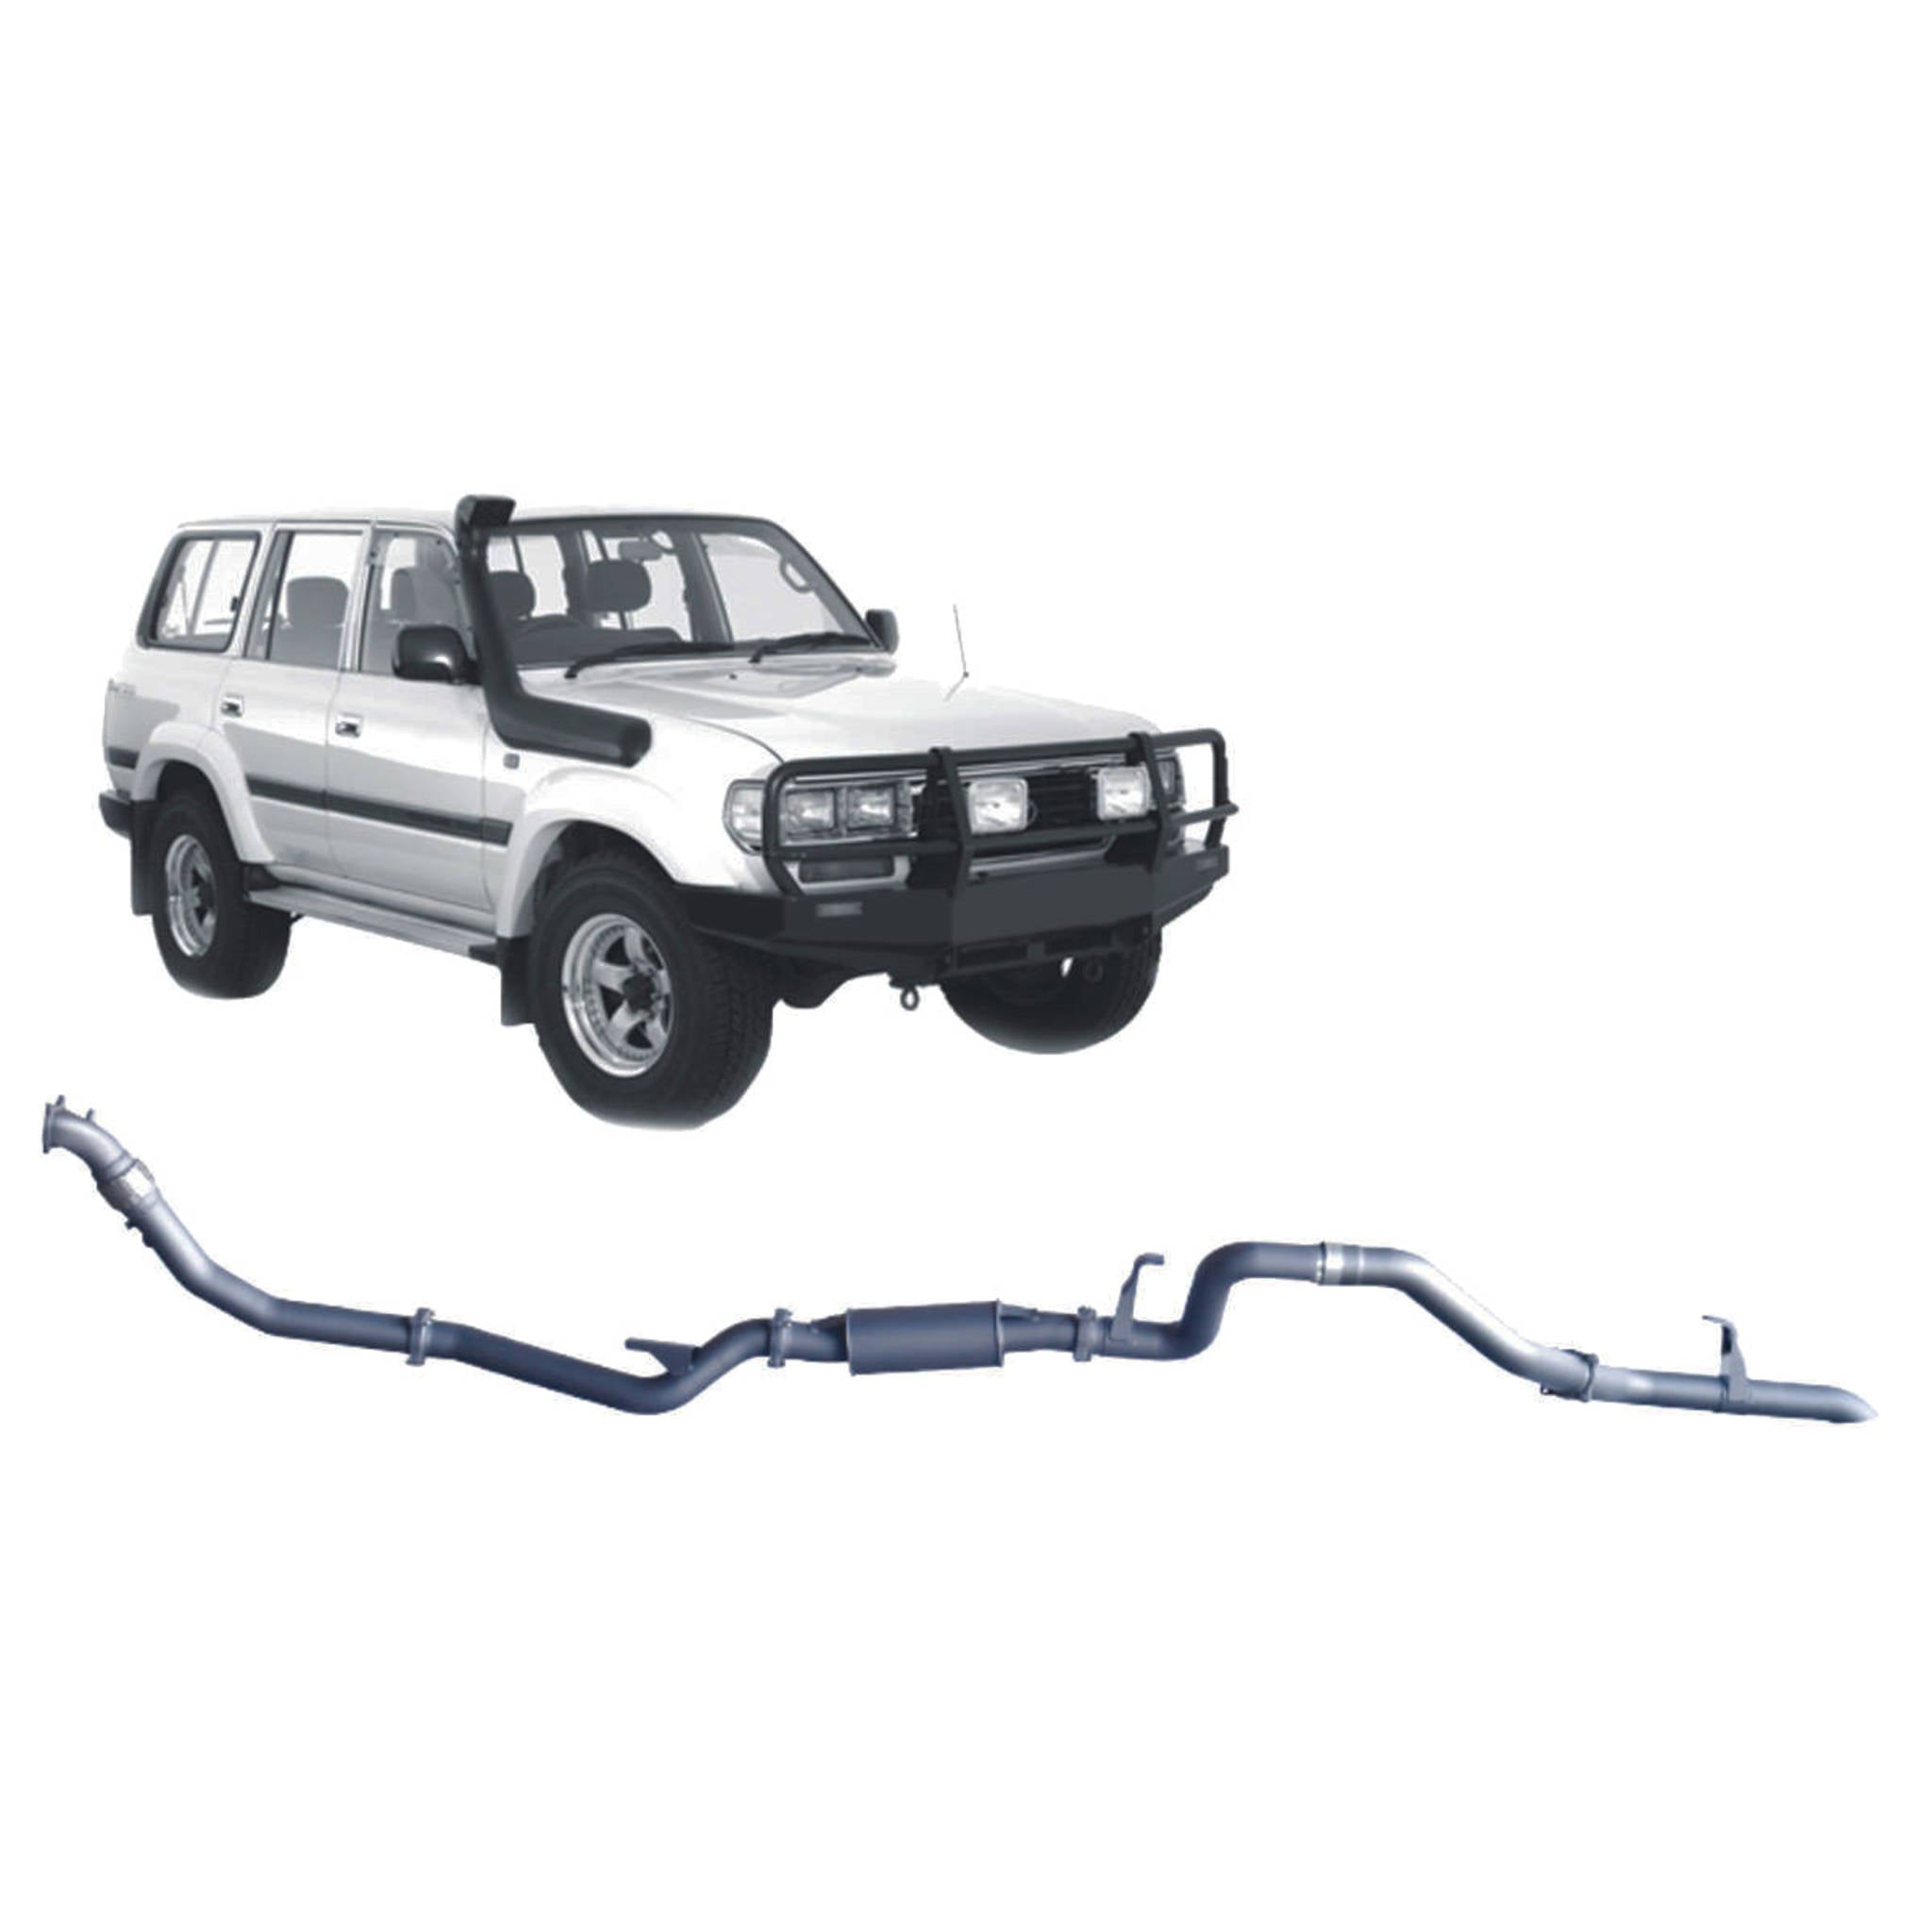 Redback 4x4 Extreme Duty Exhaust for Toyota Landcruiser 80 Series 4.2L 1HD-T/FT (01/1990 - 02/1998)